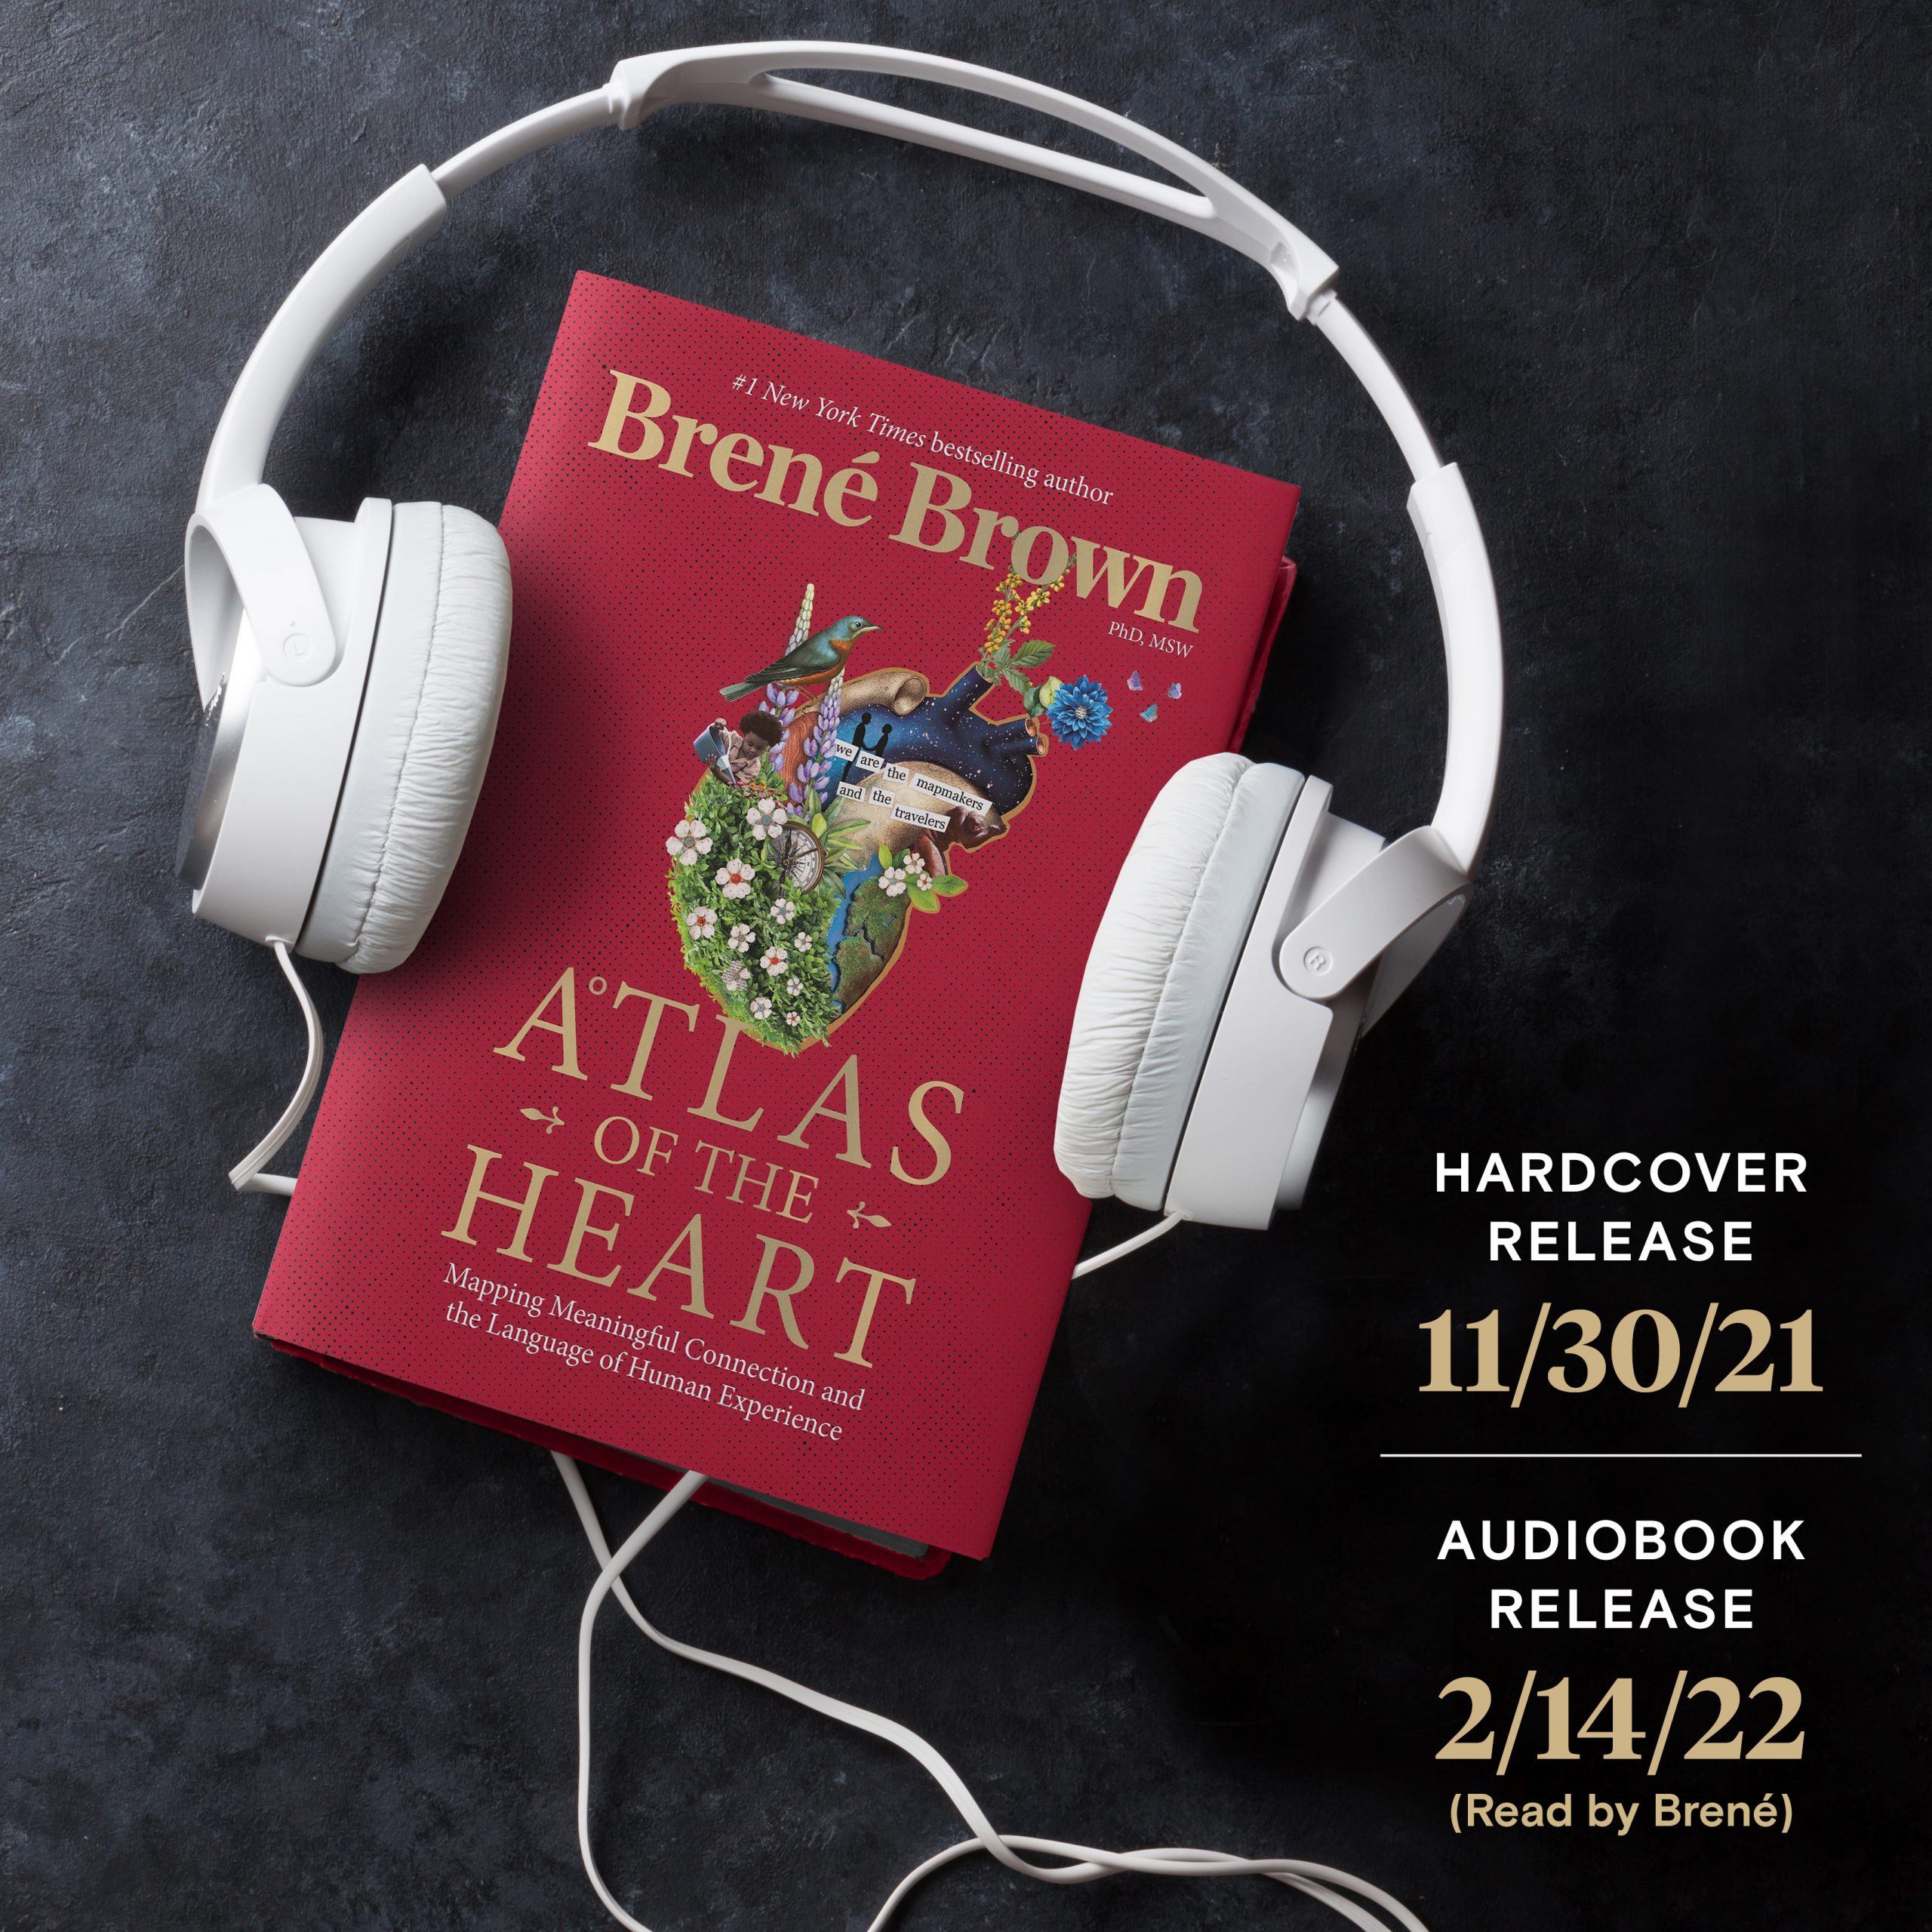 The audiobook of Atlas of the Heart, by Brené Brown, will be released on February 14, 2022.